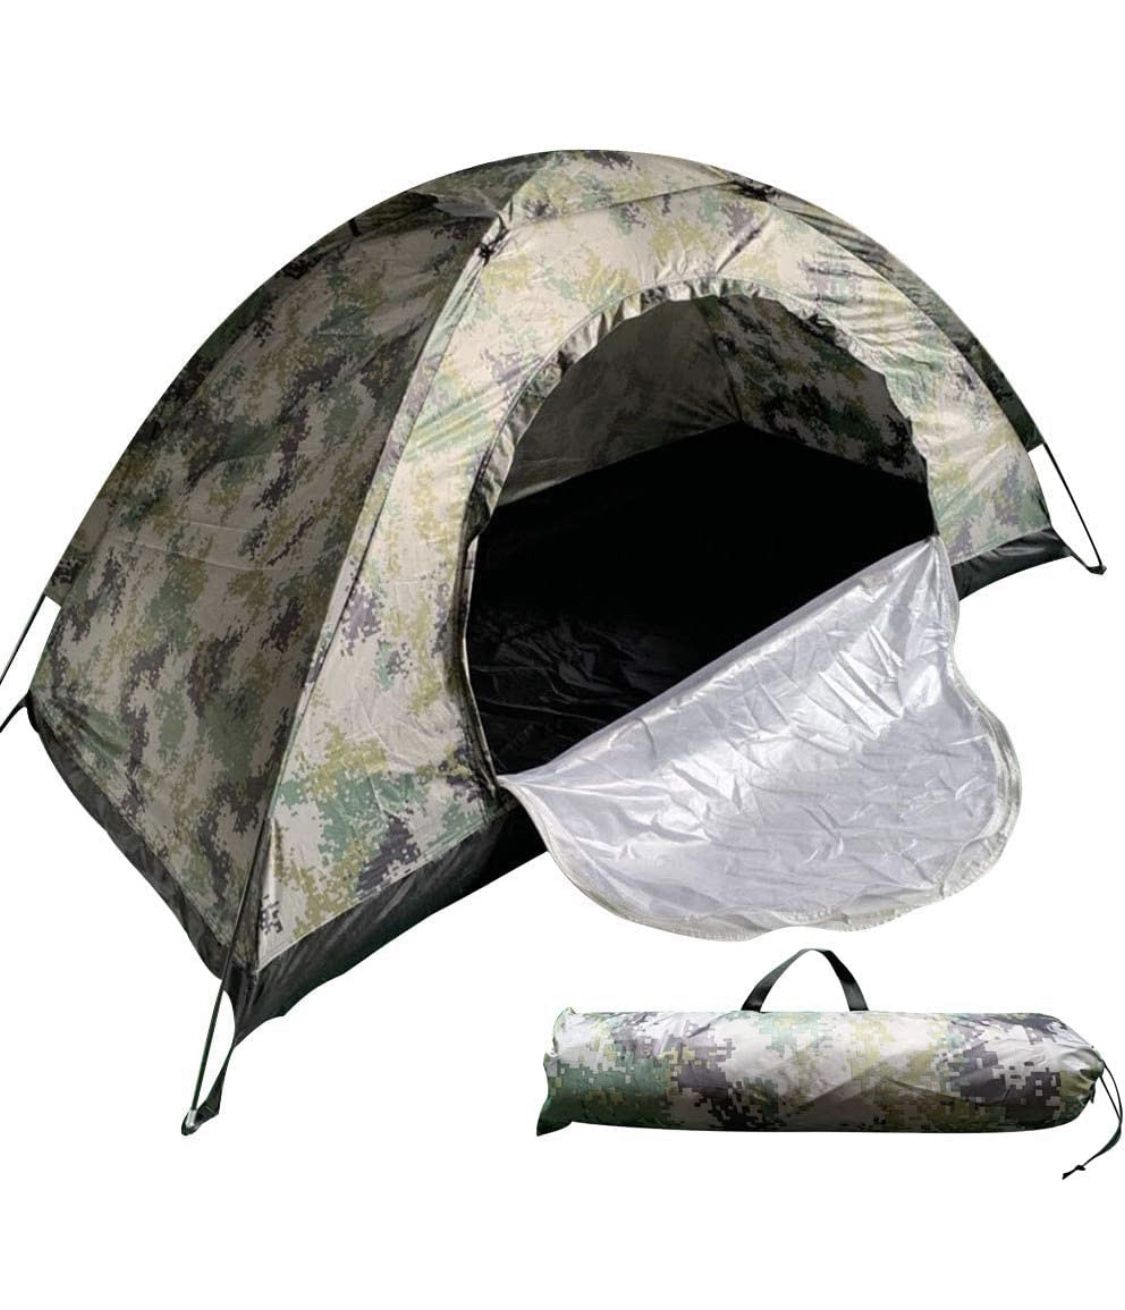 Camping Tent 1 Person, Camouflage Patterns Backpacking Tent with Carry Bag, Lightweight Waterproof Camping Hiking Tent for Travel Camping Mountaineeri